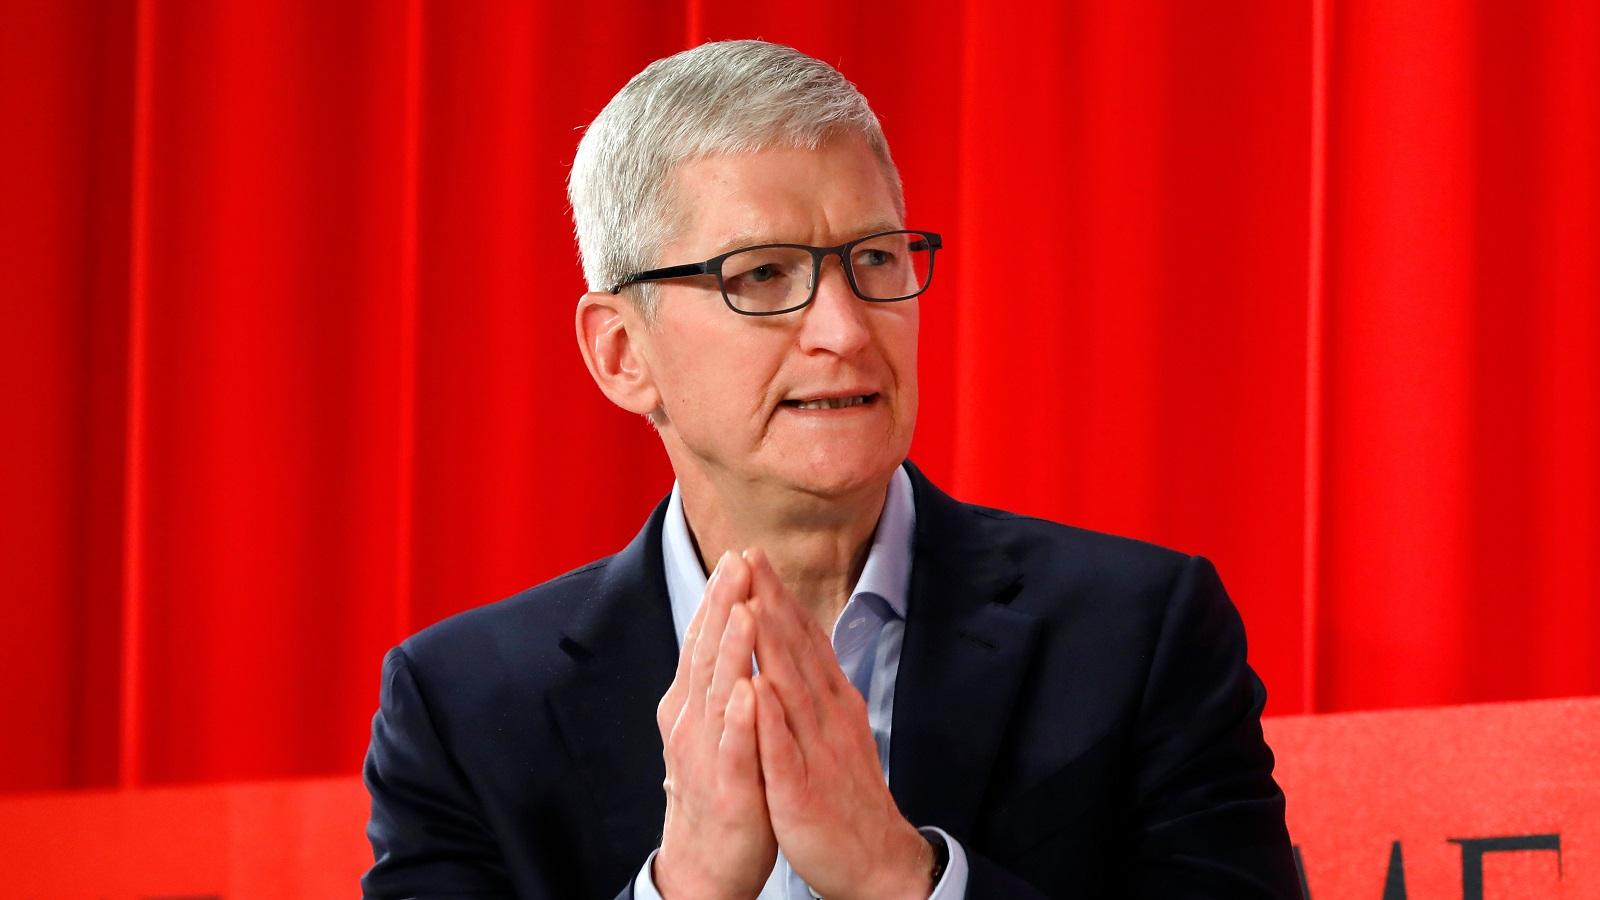 Apple's Tim Cook on Racial Injustice, George Floyd: 'We Must Do